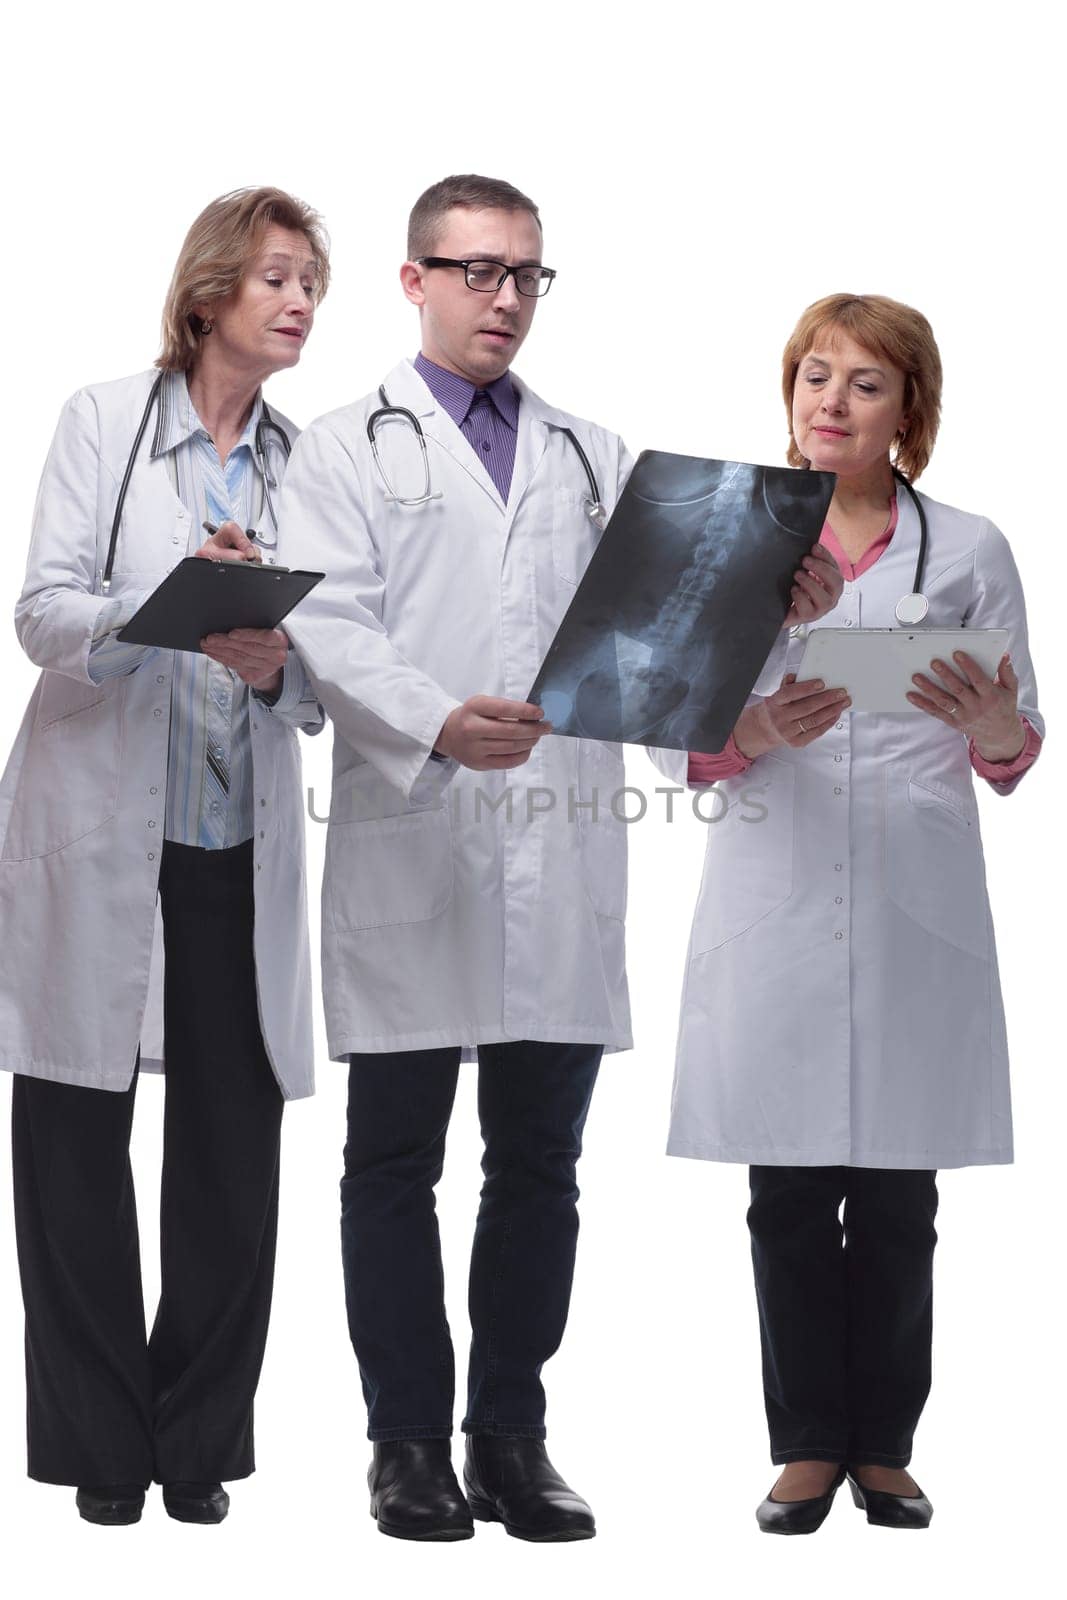 Medical team discussing diagnosis of x-ray image by asdf